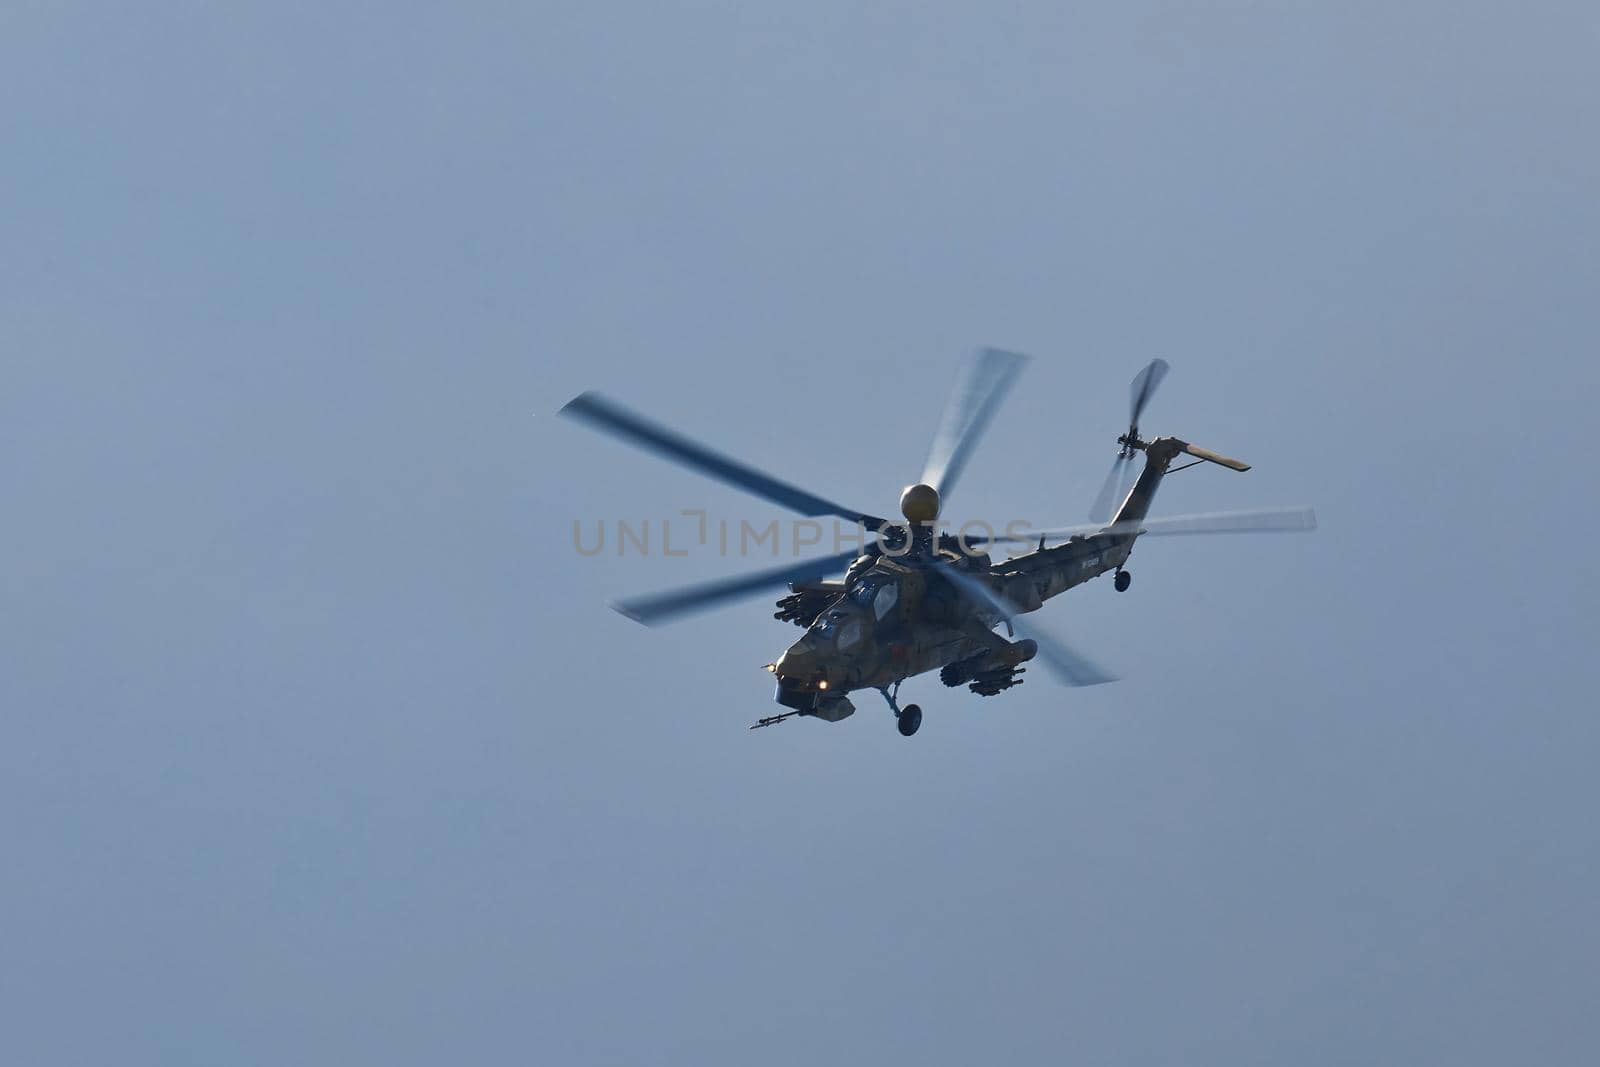 Mil Mi-28 Mi-28NM, codification of NATO: Havoc. Russian all-weather, day-night, military tandem, two-seat anti-armor attack helicopter on MAKS 2019 airshow. ZHUKOVSKY, RUSSIA, AUGUST 27, 2019 by EvgeniyQW